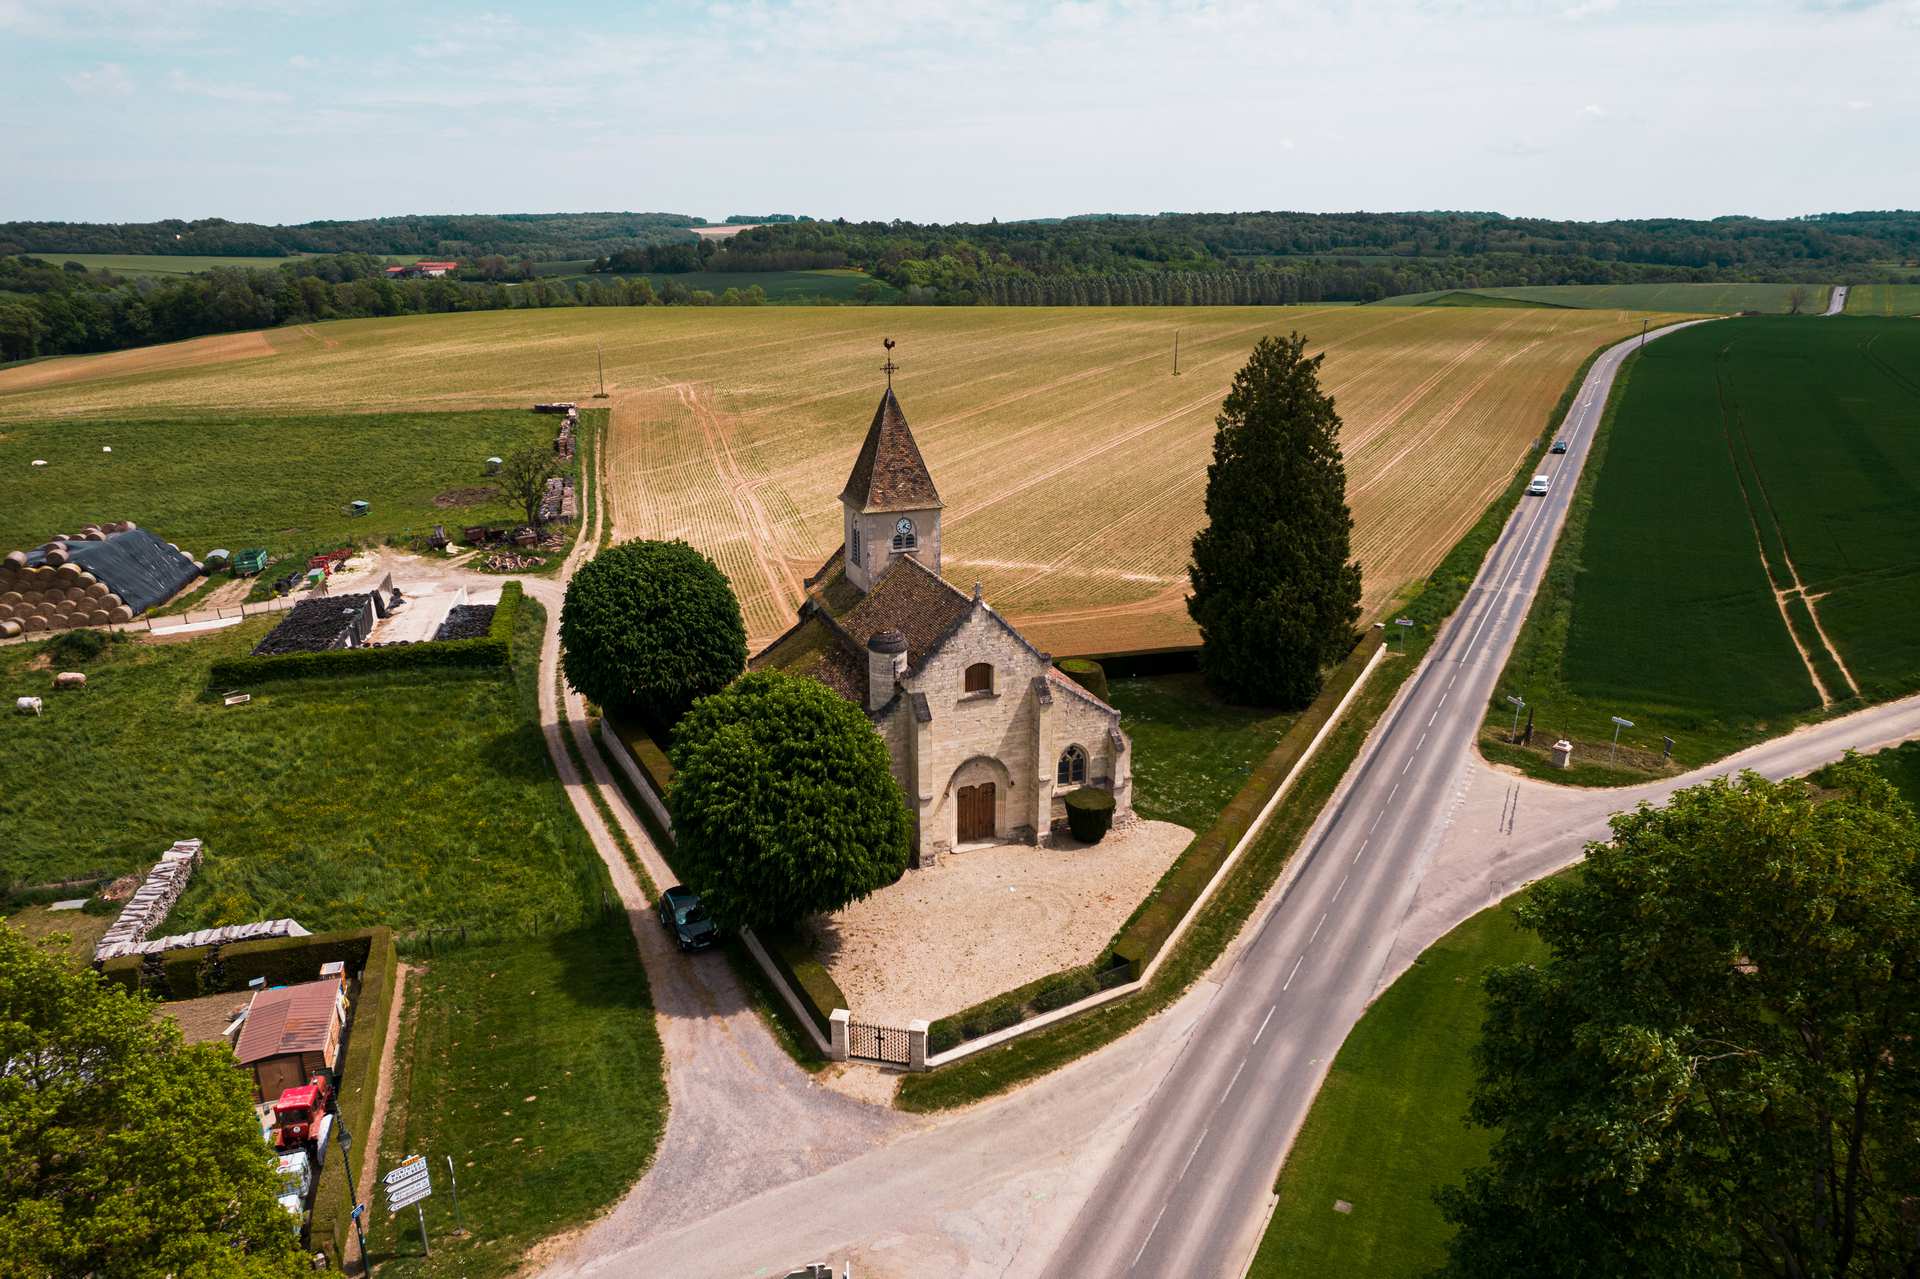 Aerial photo of chapel by the road in Normandy, France. Finishing up in Paris